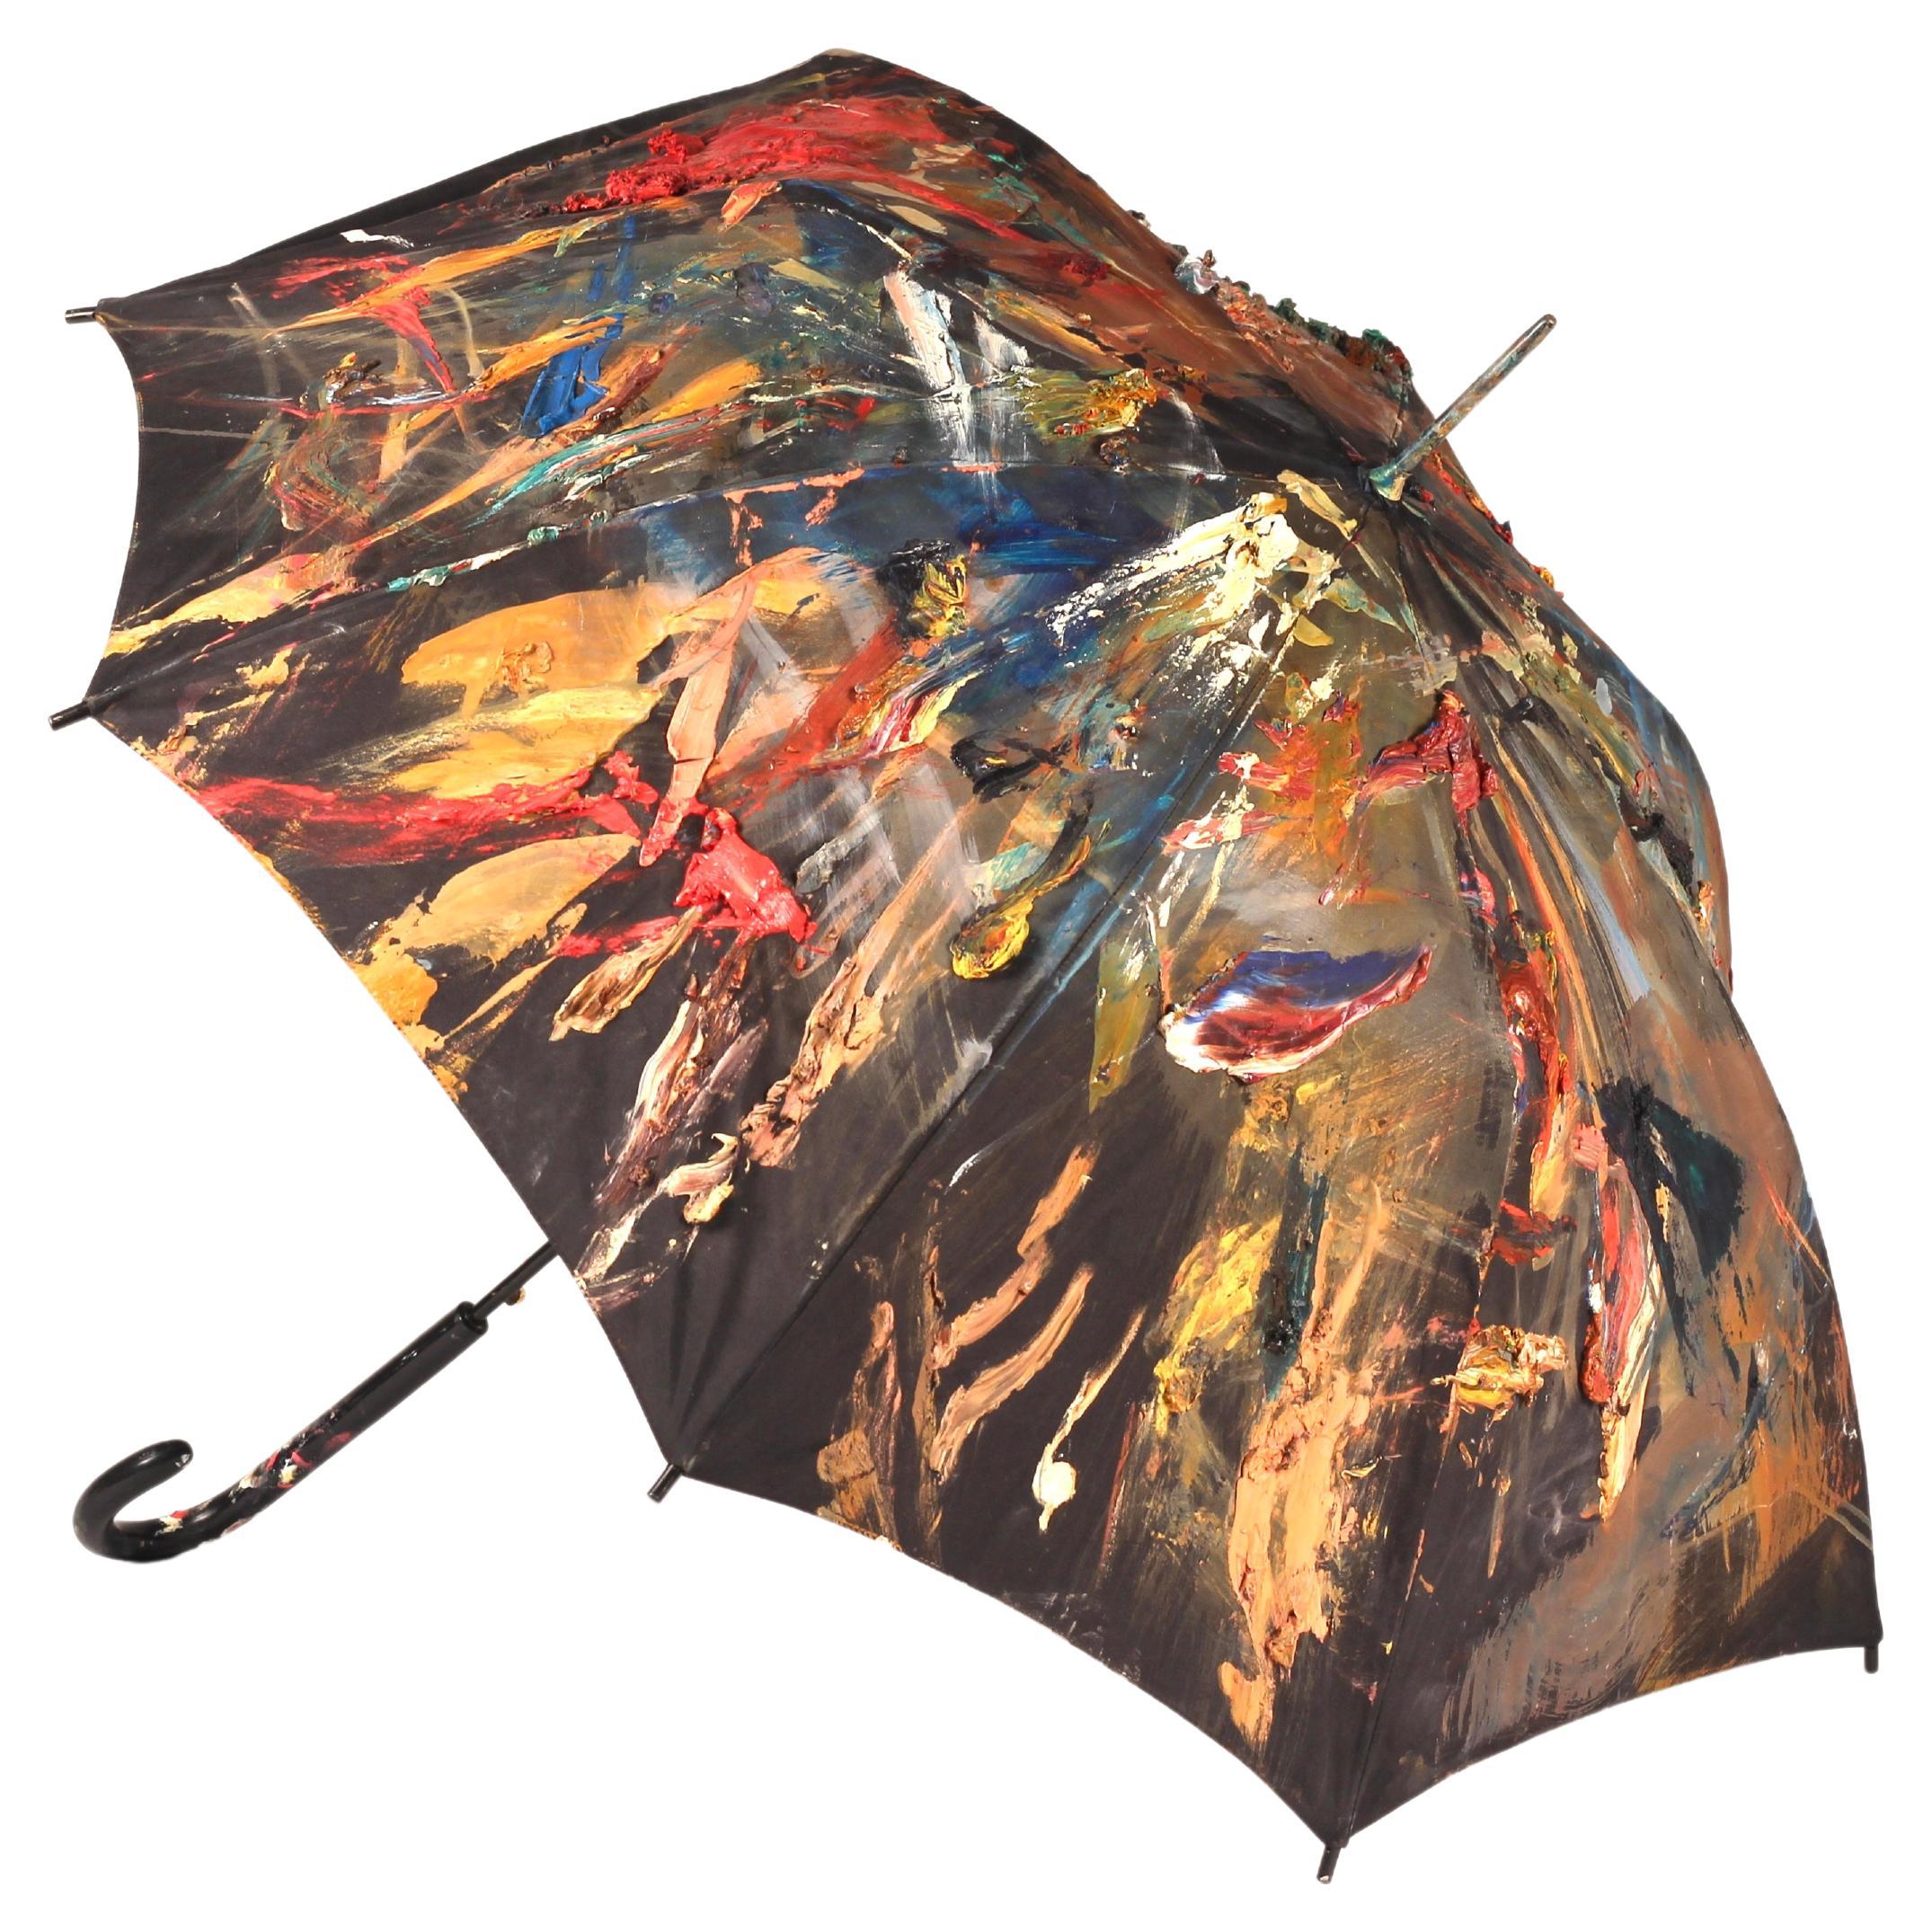 Henry Coombes, Sculpture Entitled "Umbrella" 2005; Mixed Media B 1977 For Sale